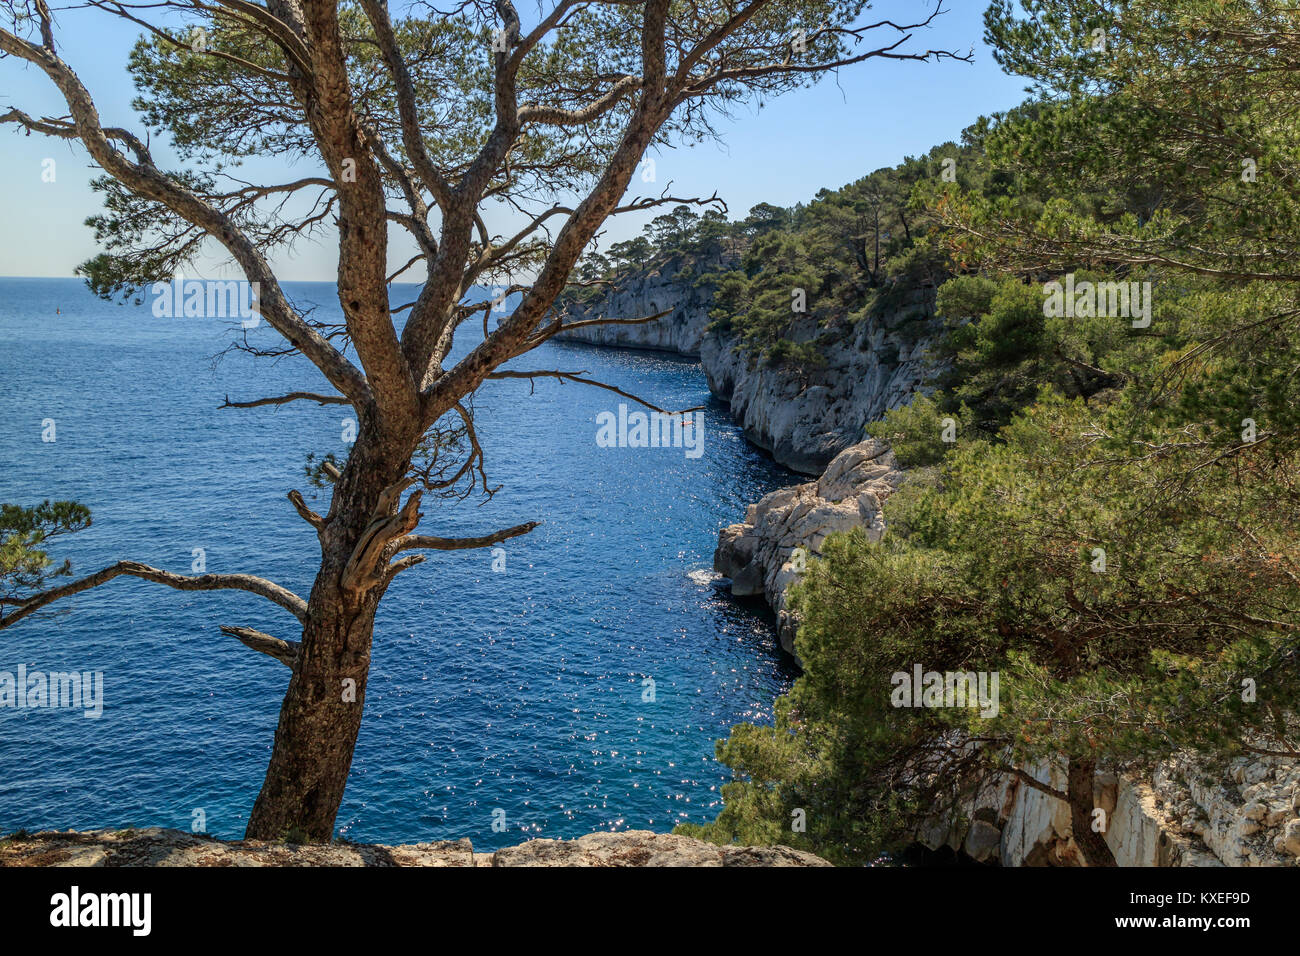 View of Mediterranean Sea at the entrance to Calanques de Port-Miou, Cassis, France Stock Photo